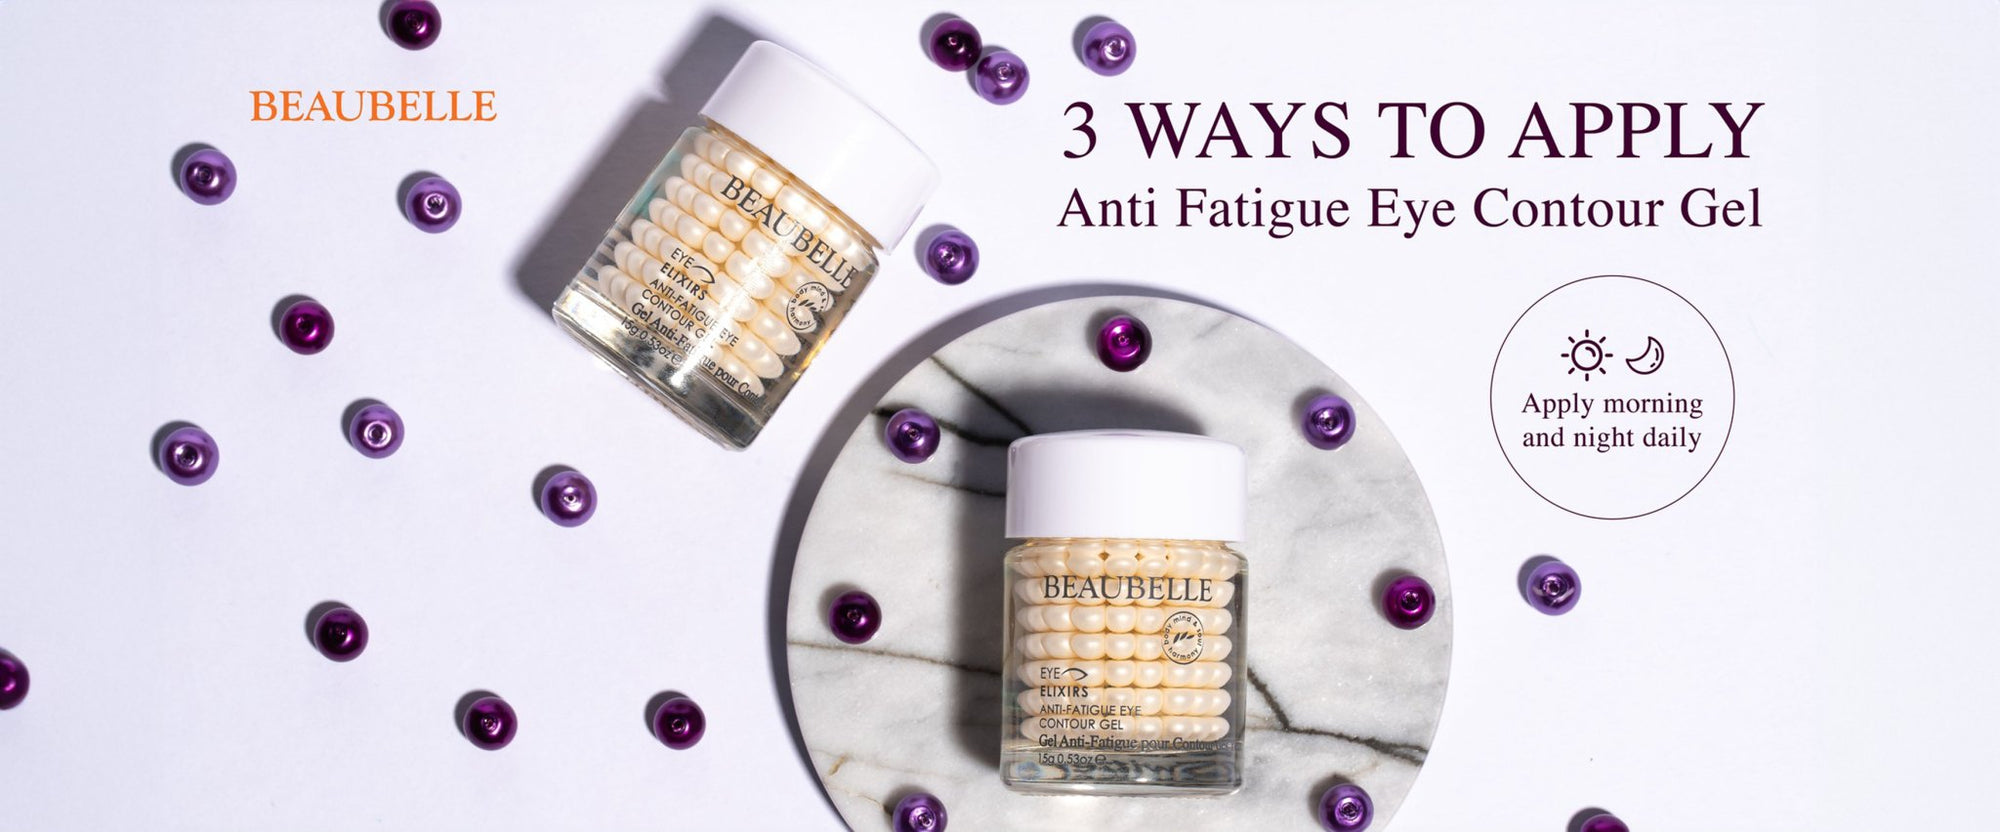 Three WAYS to apply Anti-Fatigue Eye Contour Gel - Beaubelle Asia-Pacific